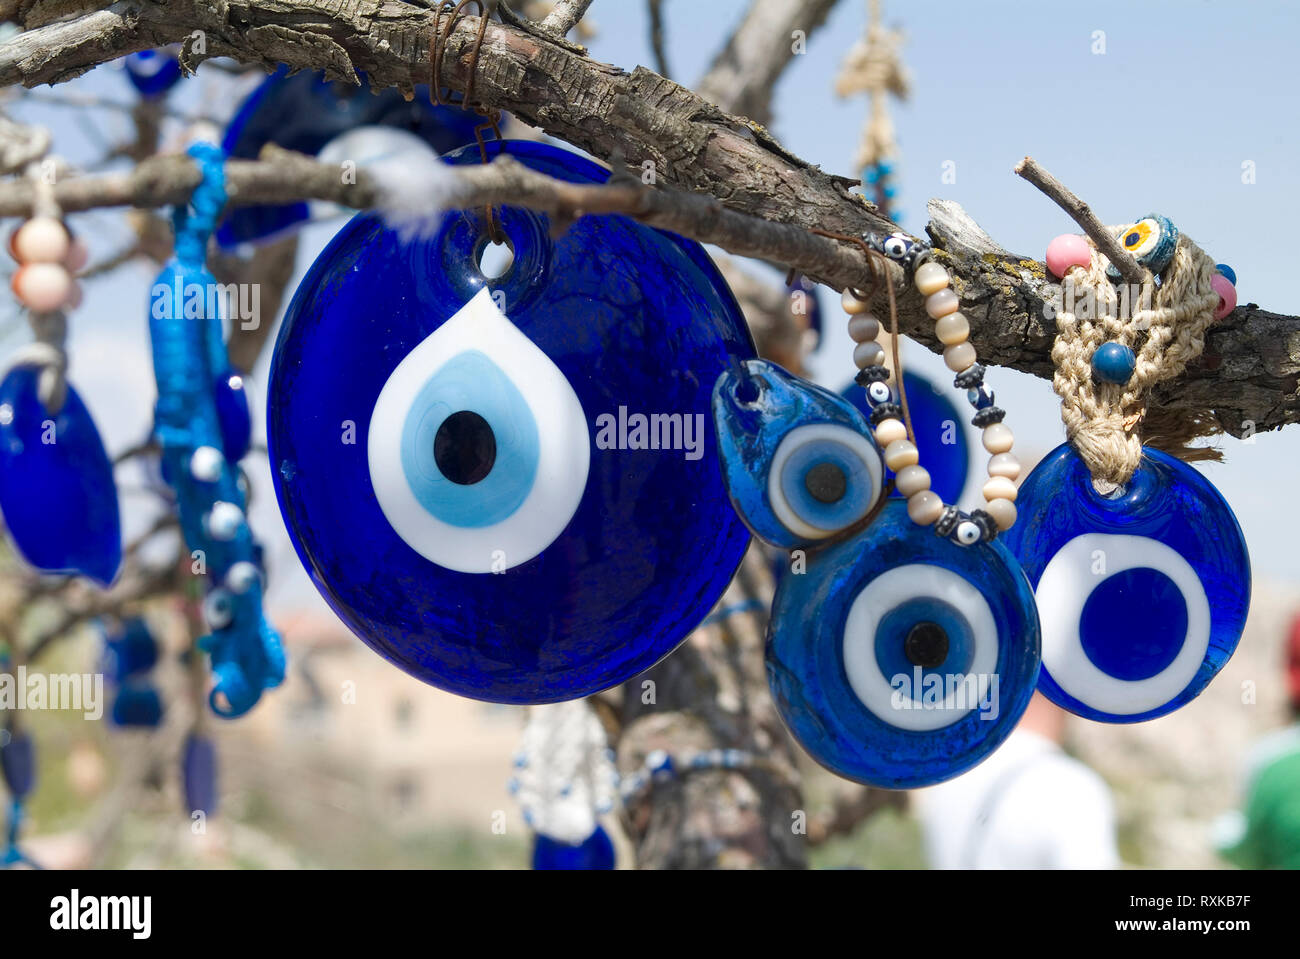 Nazar Boncugu or evil eye beads, widely used throughout Turkey to ward off the evil eye. For millennia Anatolian artisans have created blue glass 'eye Stock Photo